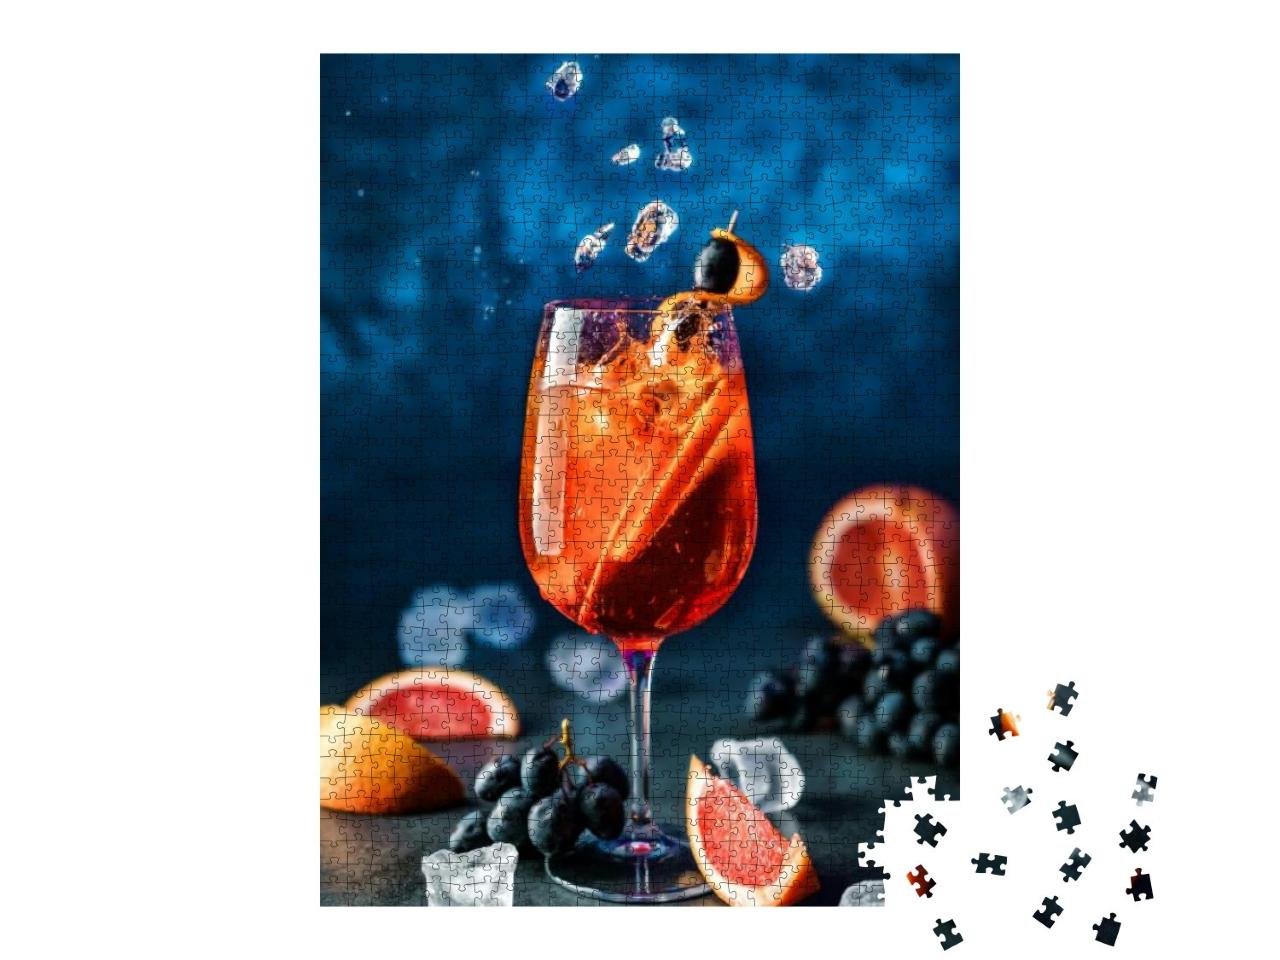 Fresh Grapefruit Cocktail with Orange, Grapes & Ice in Wi... Jigsaw Puzzle with 1000 pieces